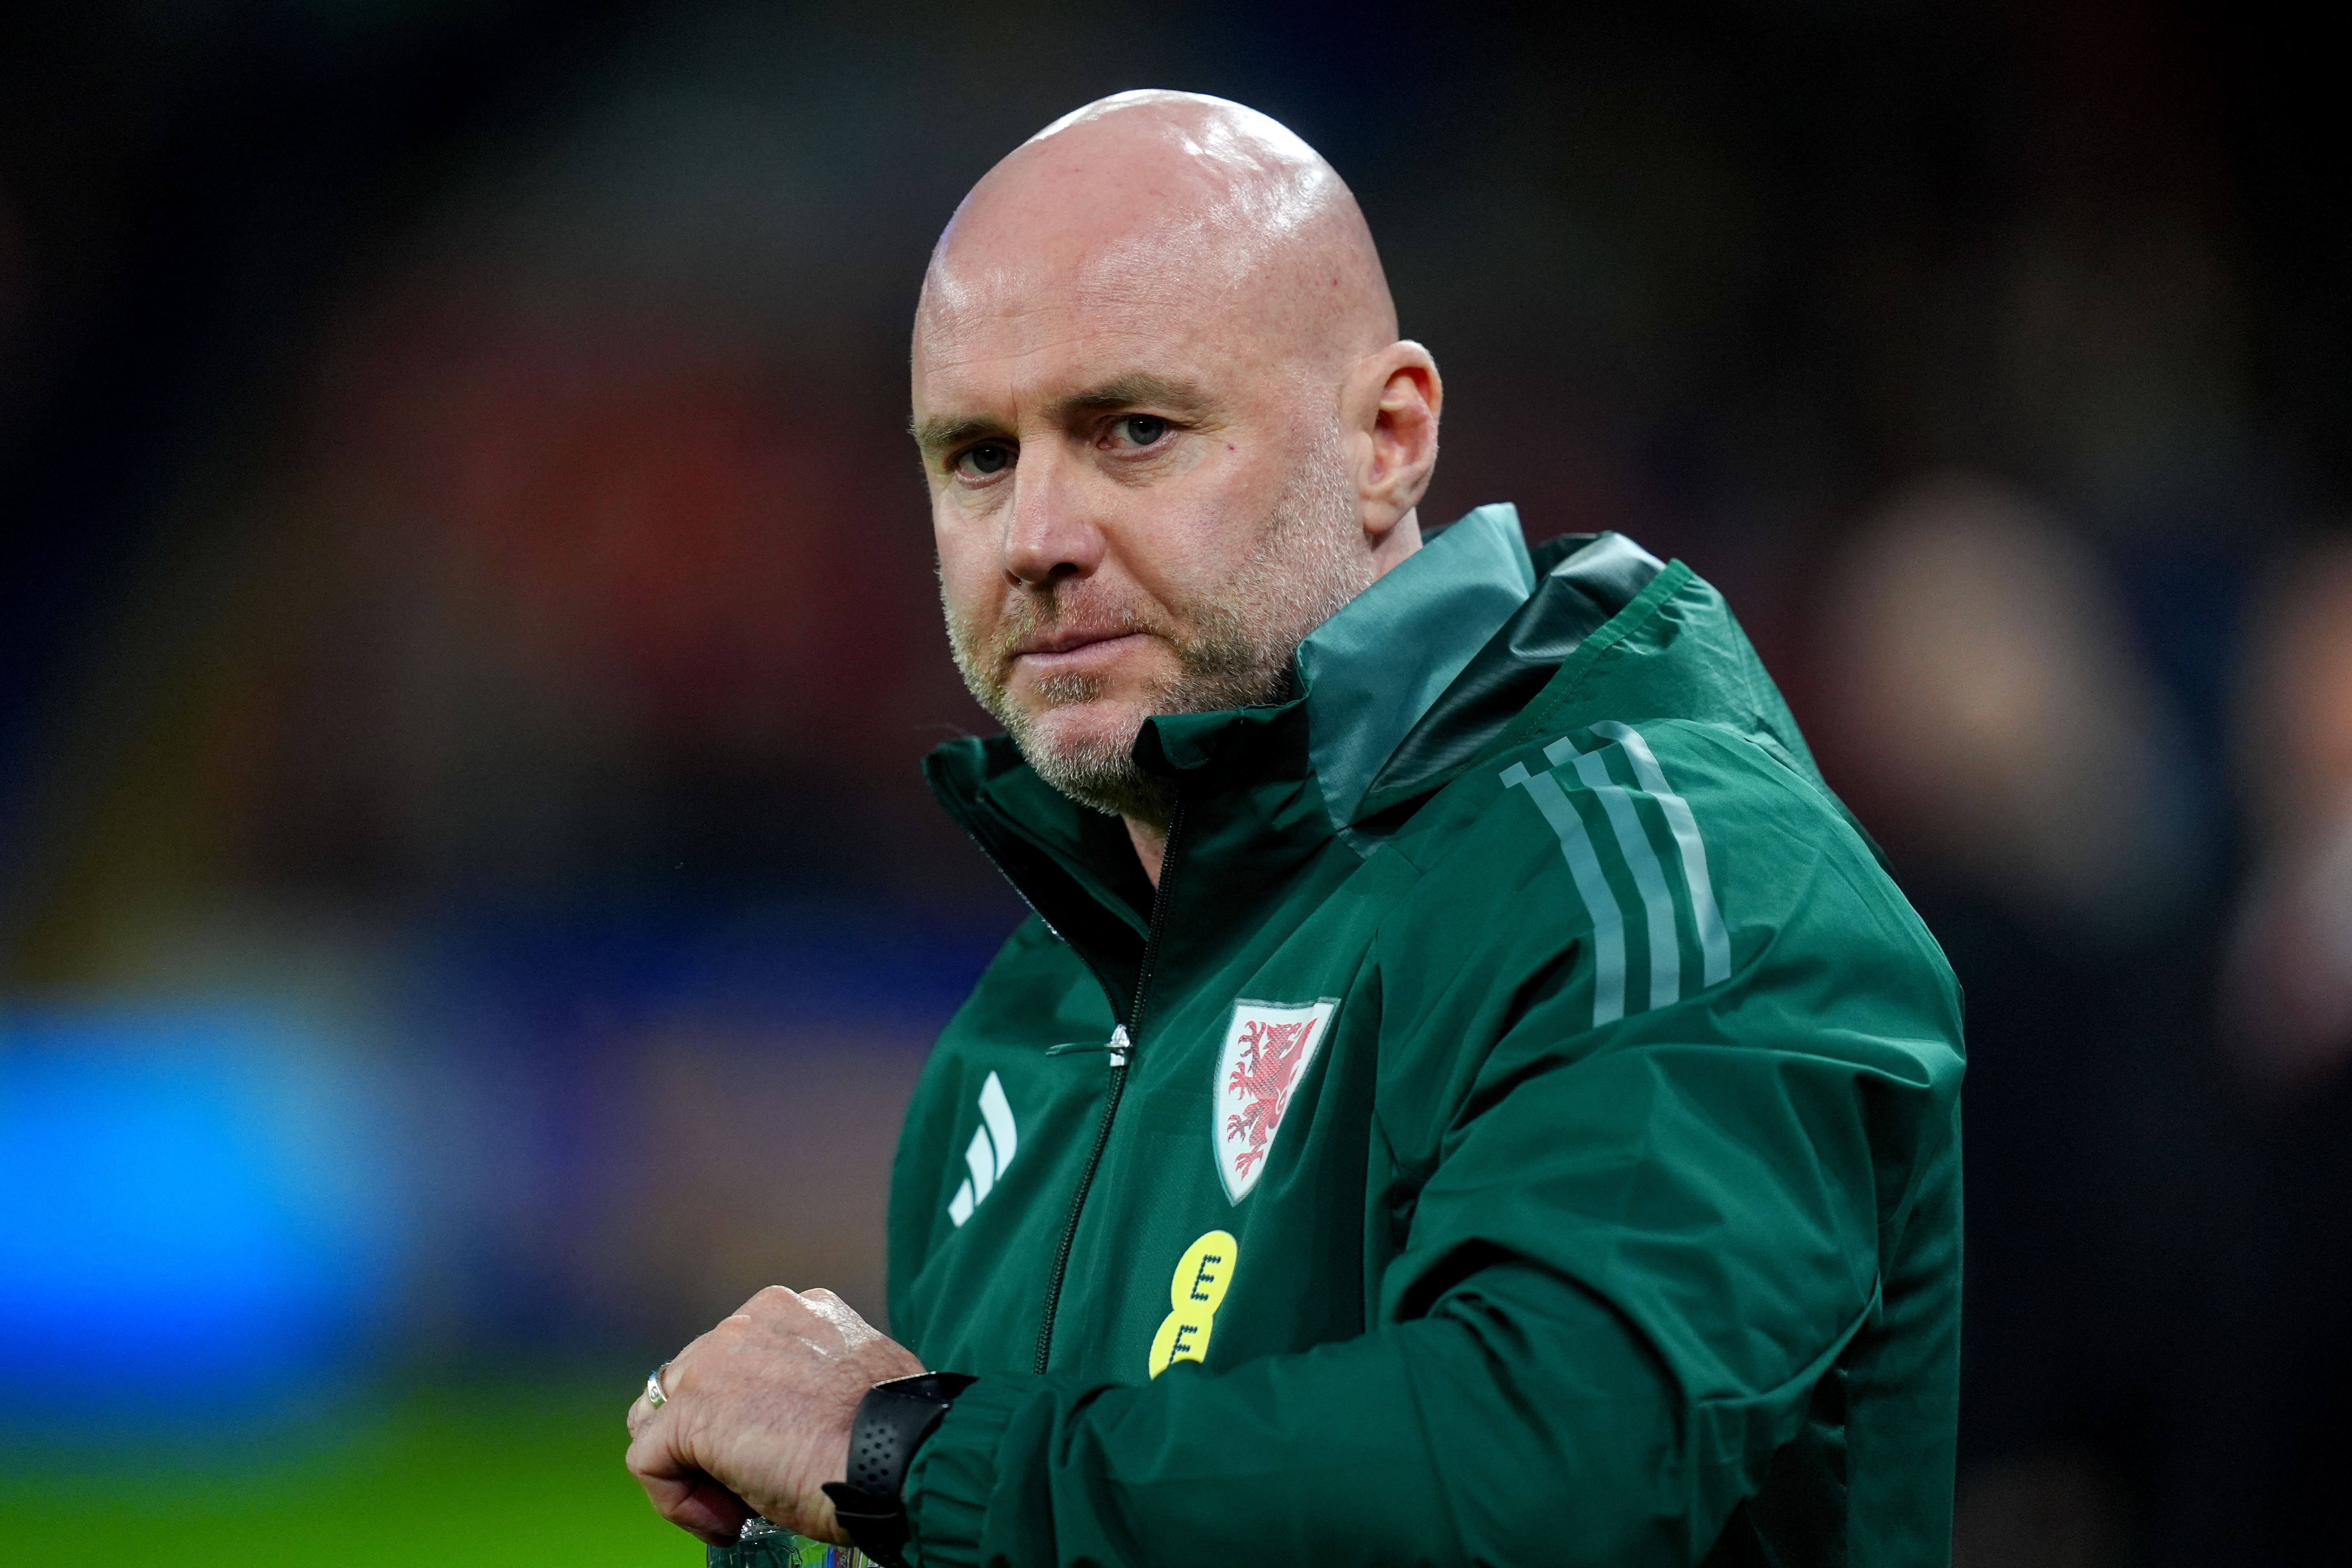 Wales manager Rob Page has been sacked